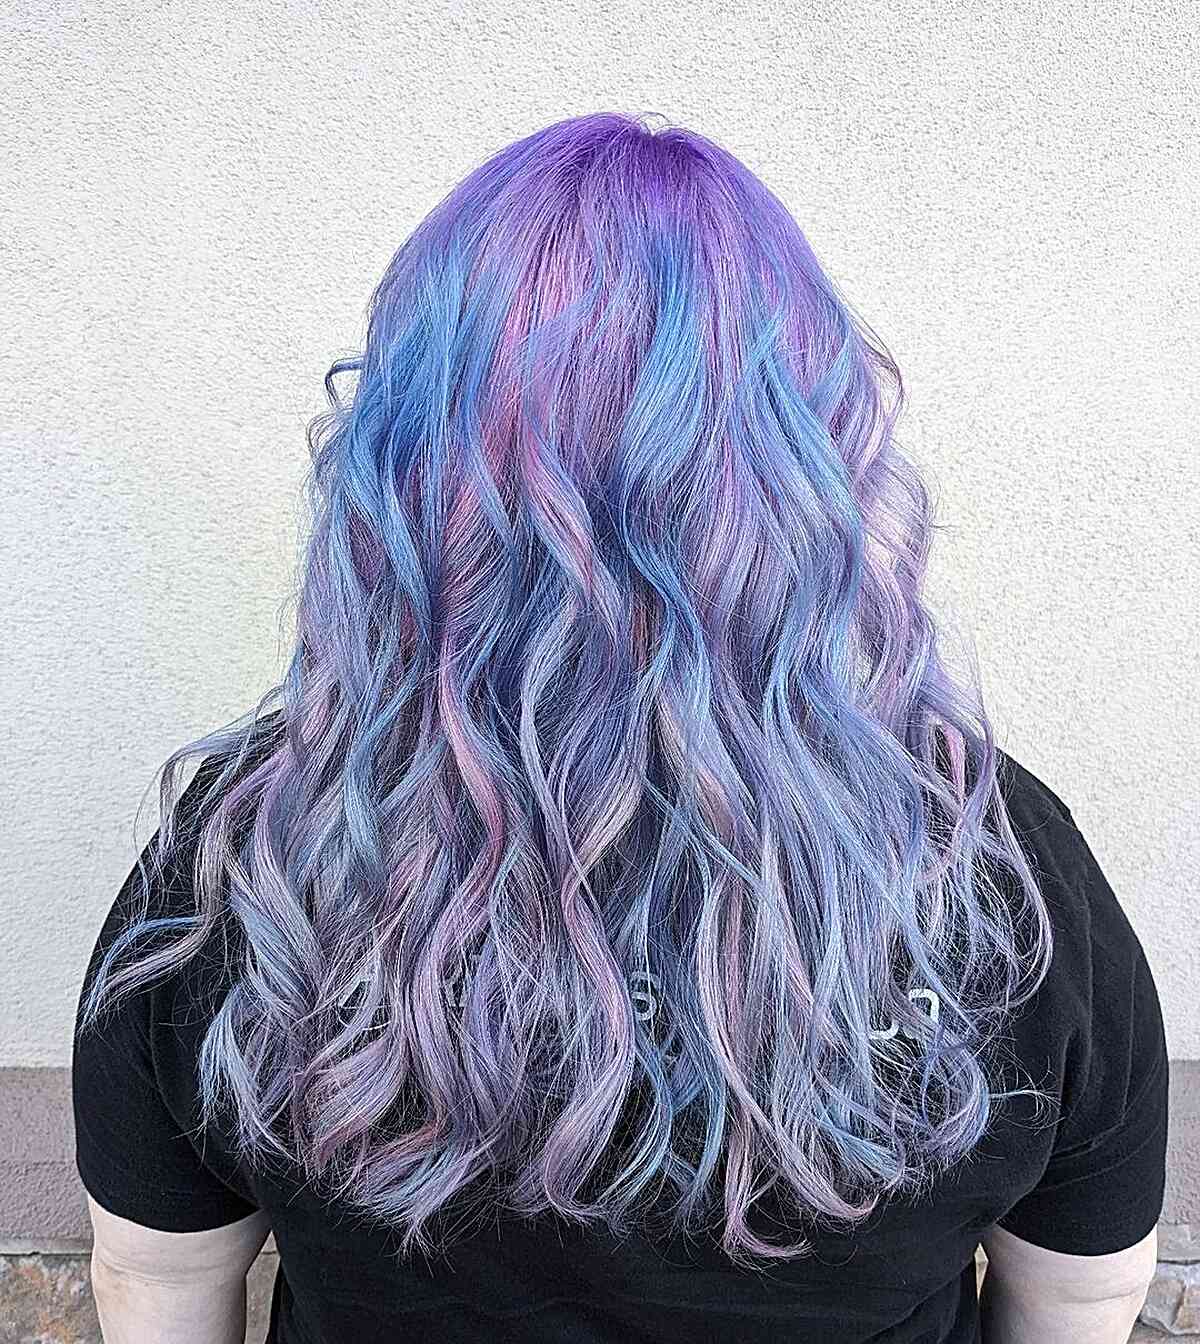 Cotton Candy Purple Roots with Pink and Blue Highlights